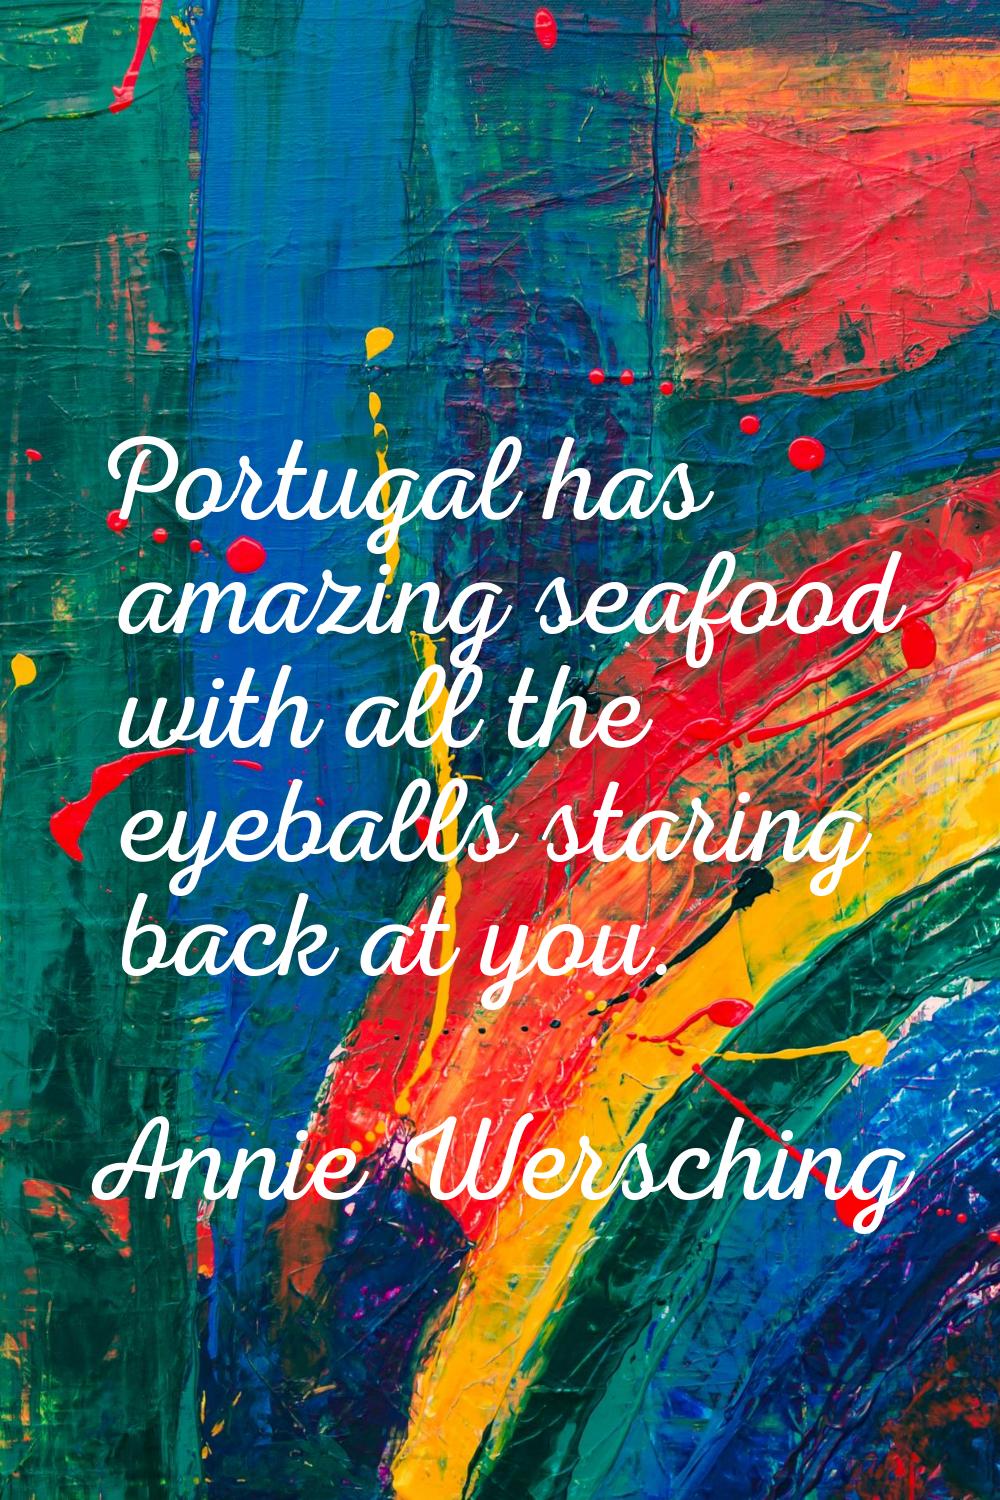 Portugal has amazing seafood with all the eyeballs staring back at you.